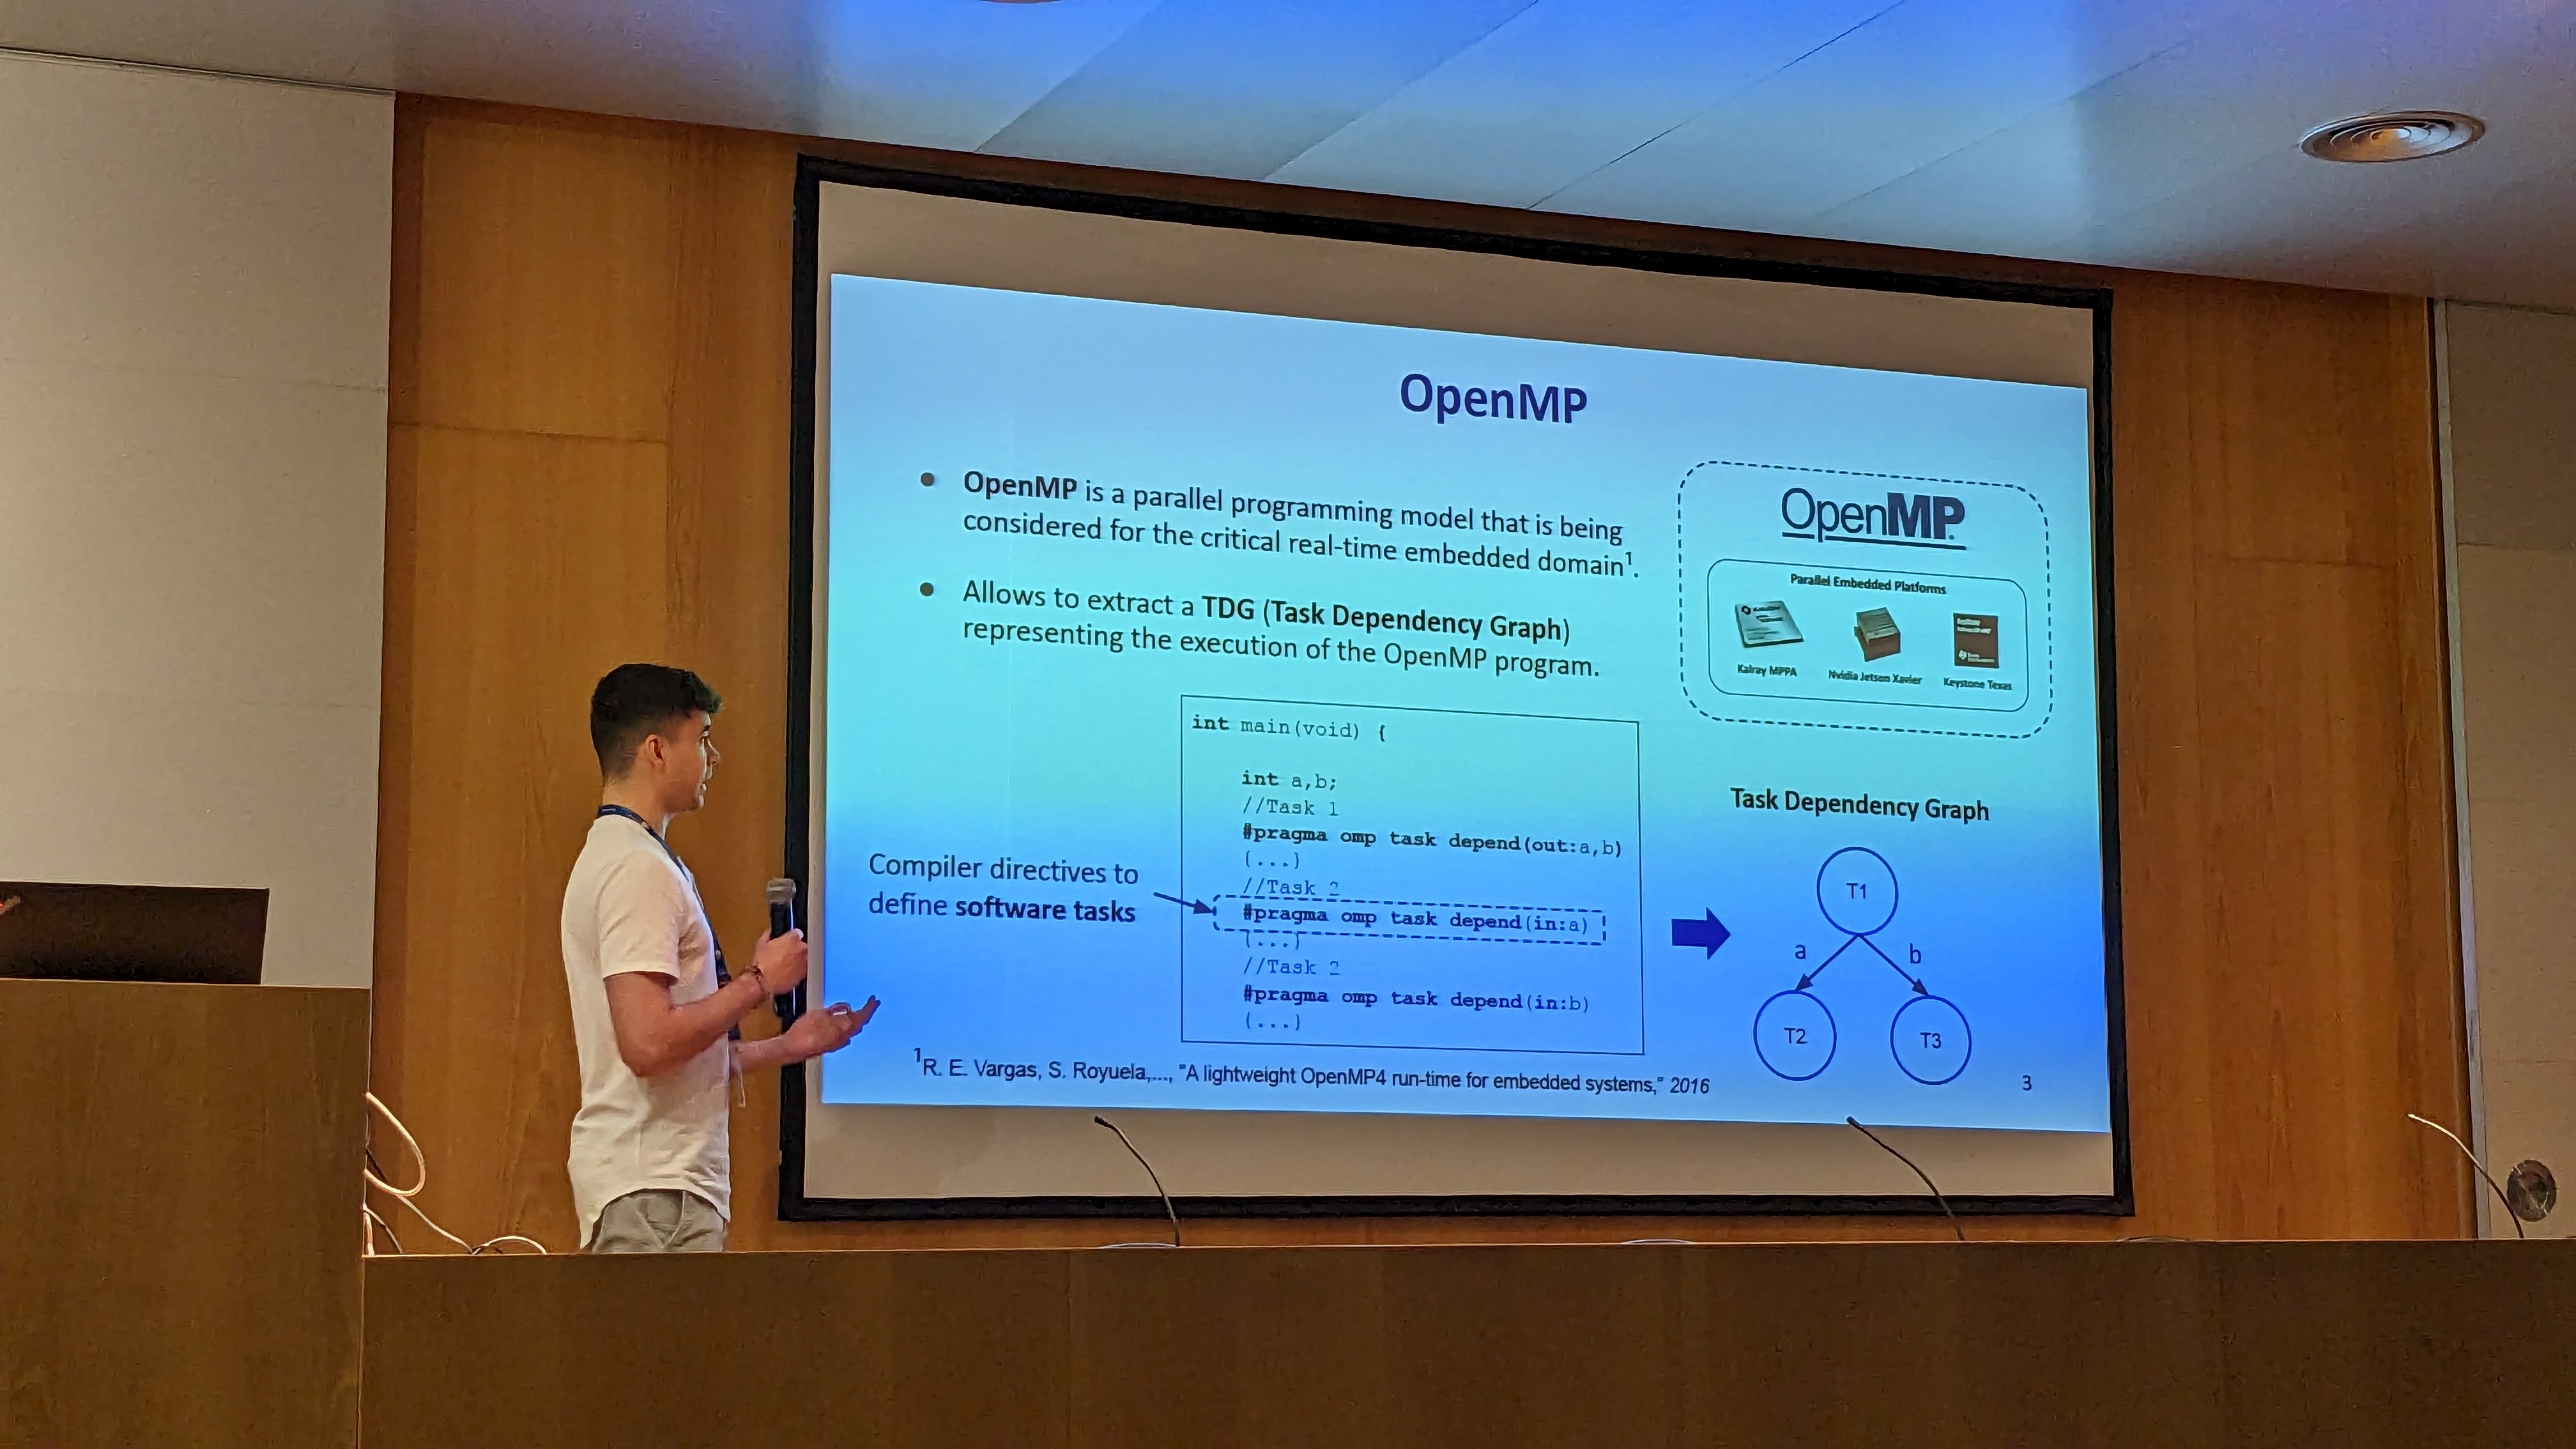 Adrián Munera during his presentation on the OpenMP programming model